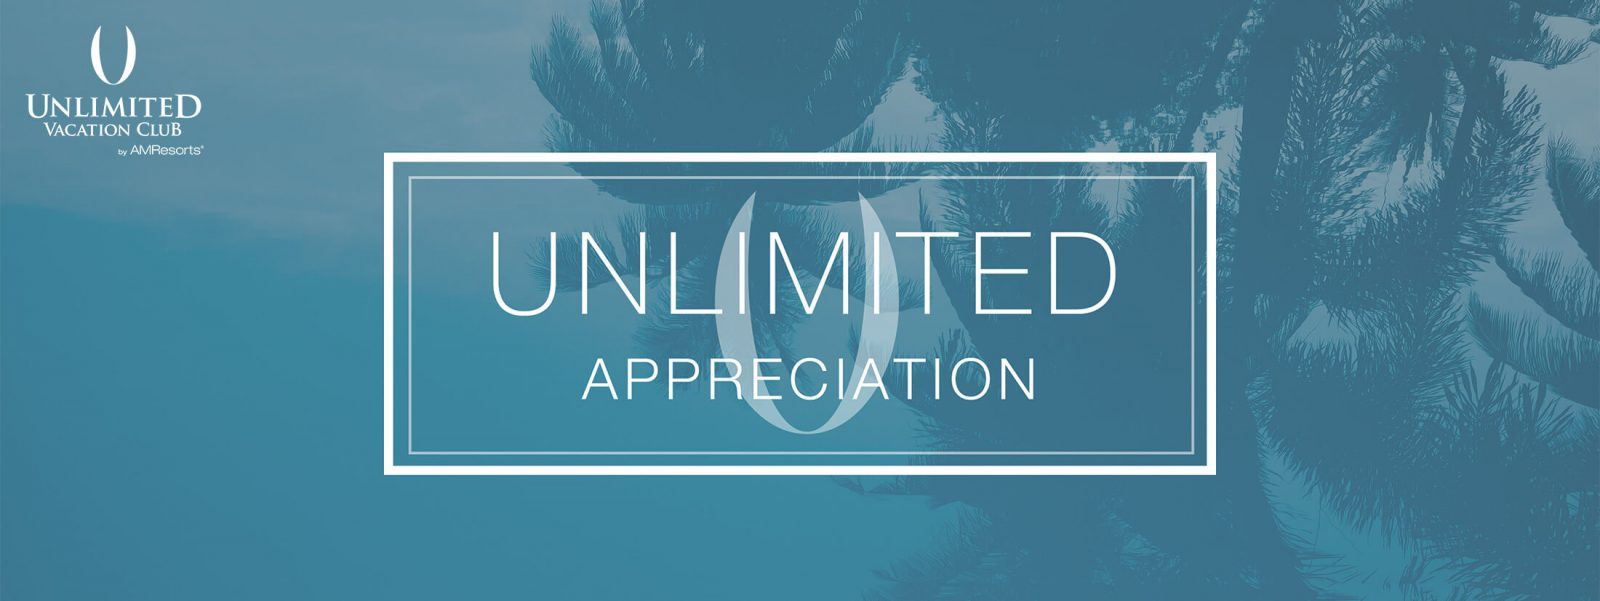 Meet The Winners Of Our Unlimited Appreciation Contest Unlimited